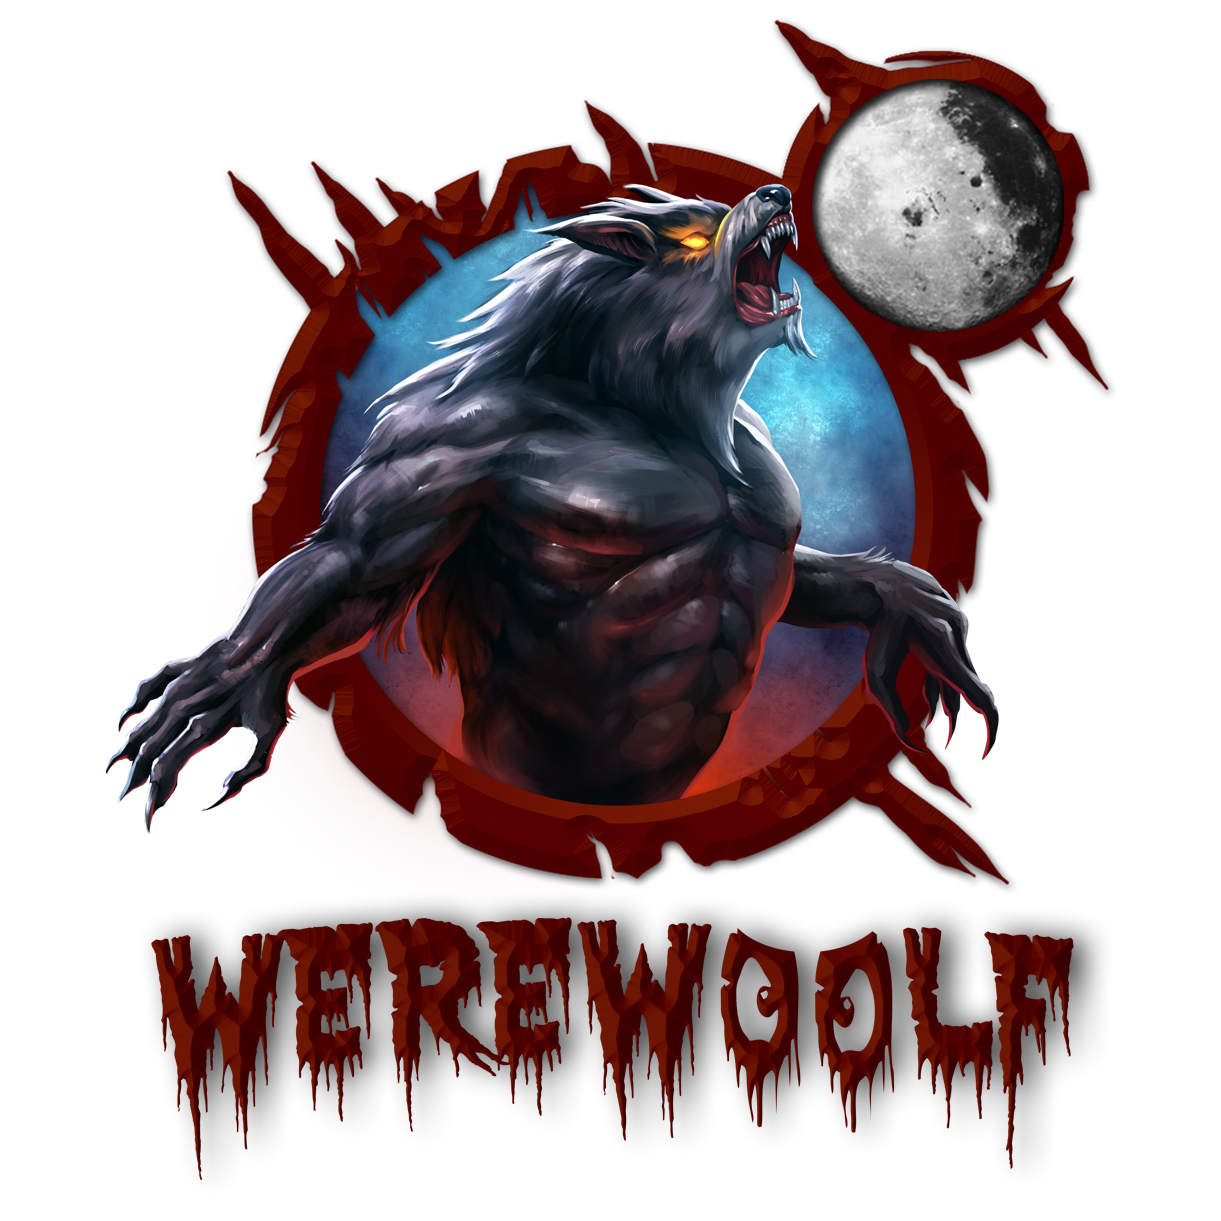 Werewoolf Miniatures: Two models to take! Our small contest